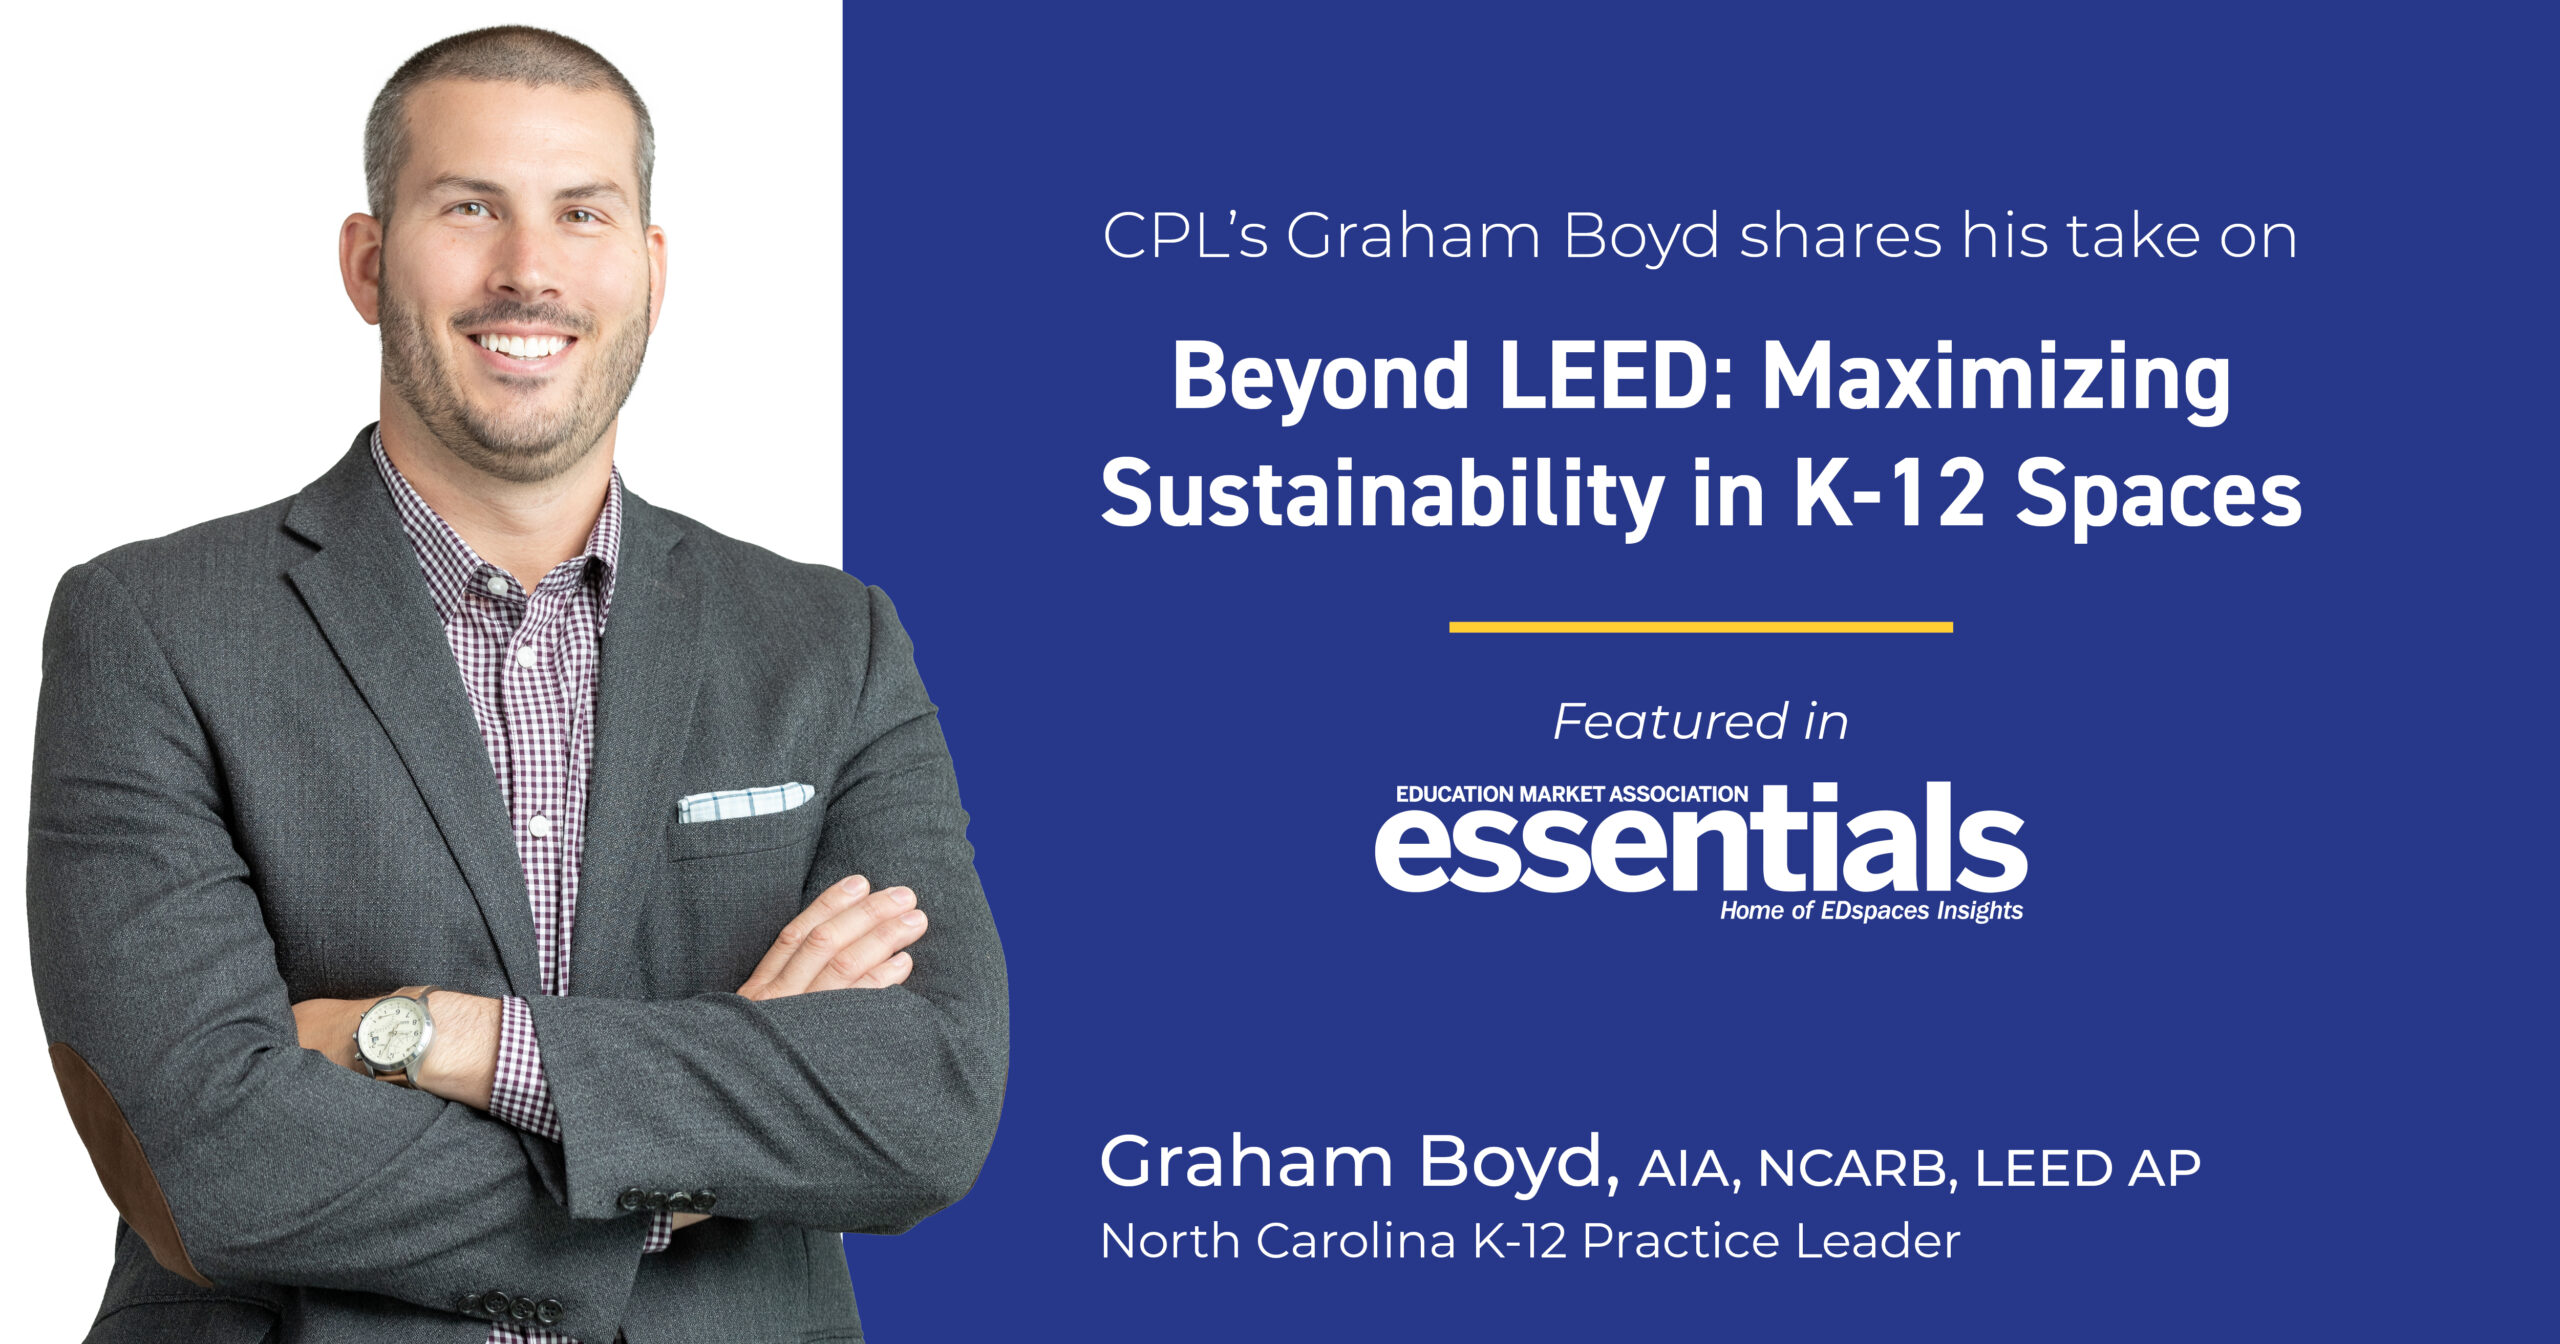 Image is a graphic that shows a man with arms crossed and smiling on the left. On the right it reads "CPL's Graham Boyd shares his take on Beyond LEED: Maximizing Sustainability in K-12 Spaces Featured in Education Market Association essentials Home of EDspaces Insights. Graham Boys, AIA, NCARB, LEED AP North Carolina K-12 Practice Leader"